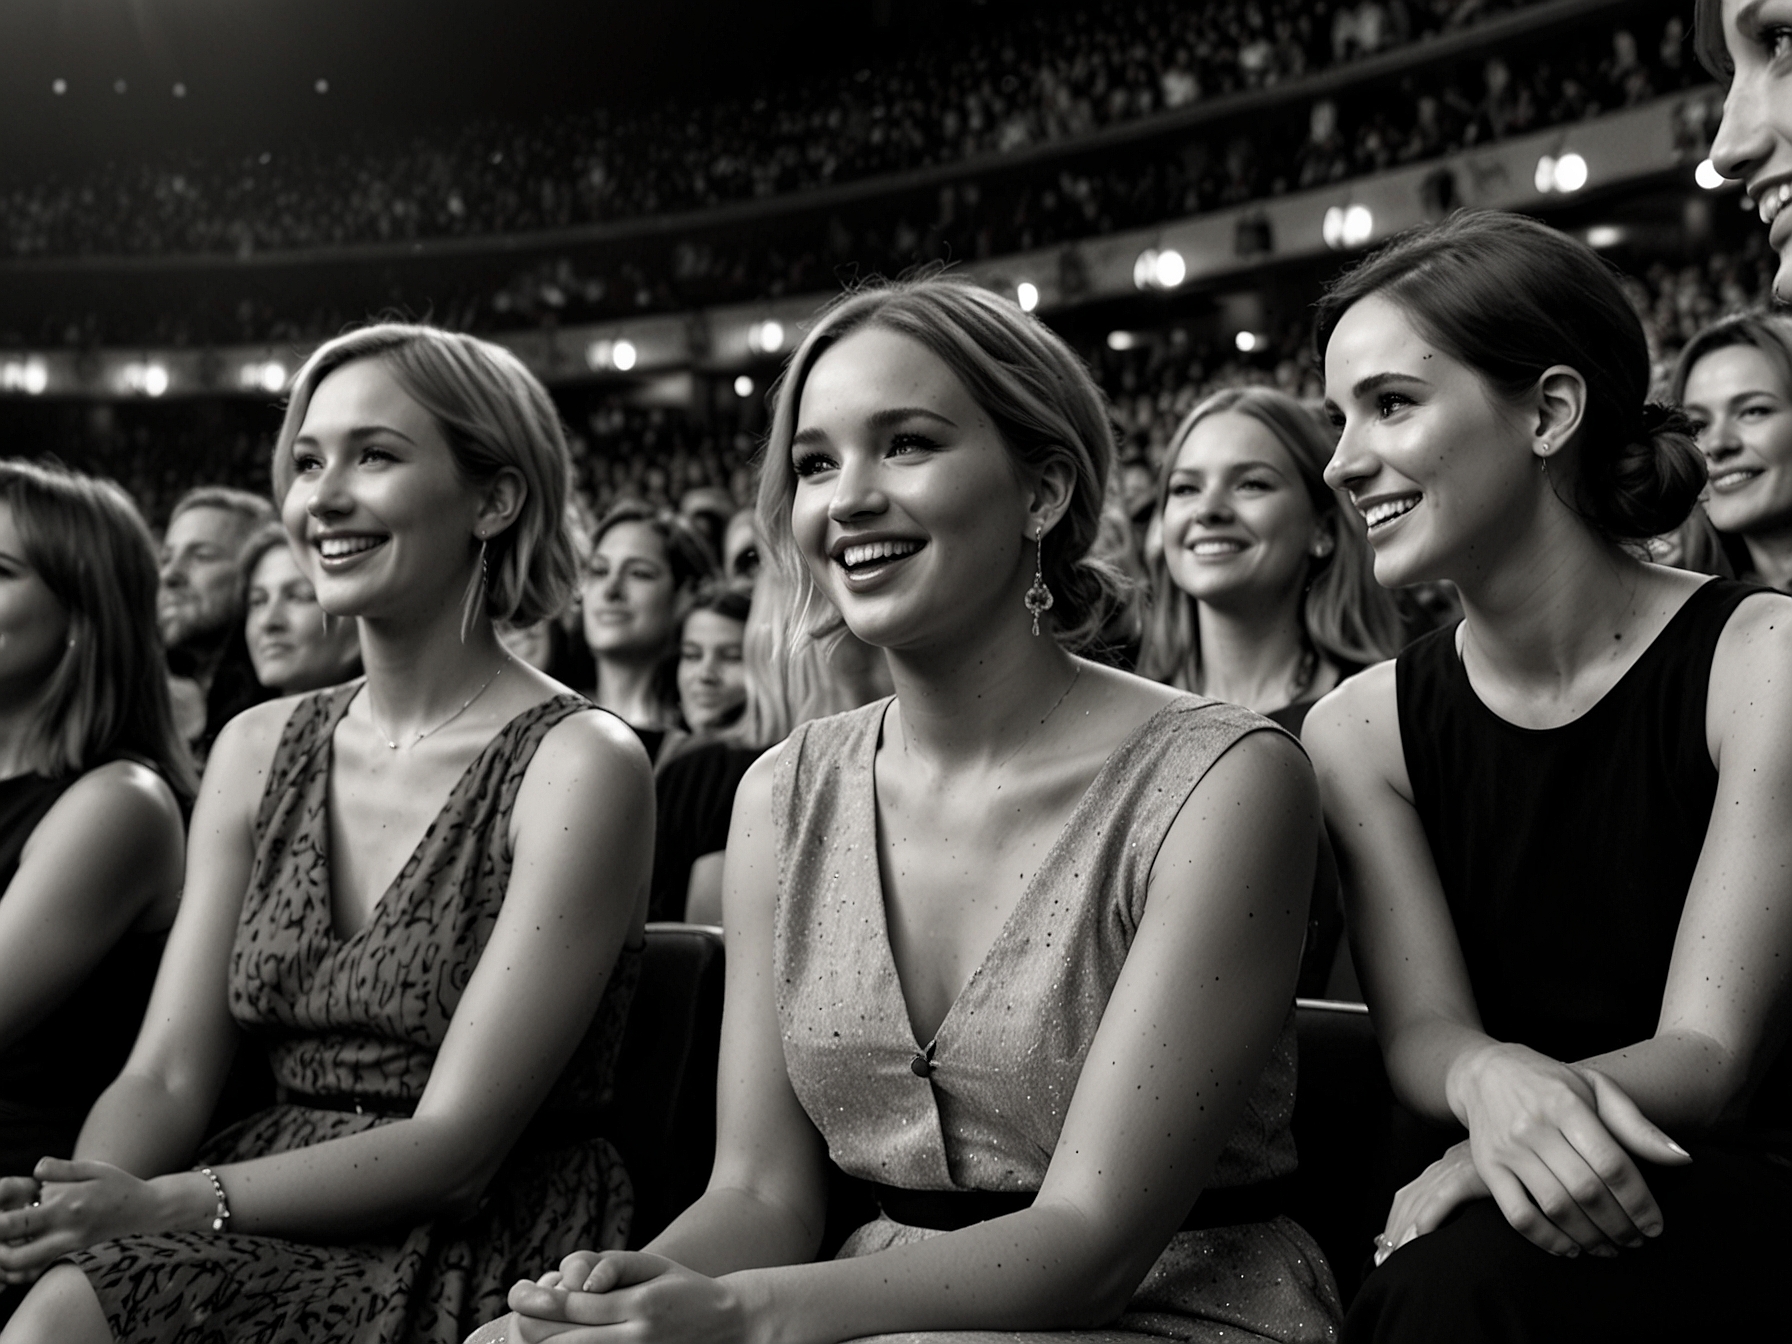 Celebrities like Jennifer Lawrence, Emma Watson, and Meghan Markle spotted in the audience, smiling and enjoying Taylor Swift's captivating performance at the London Eras Tour.